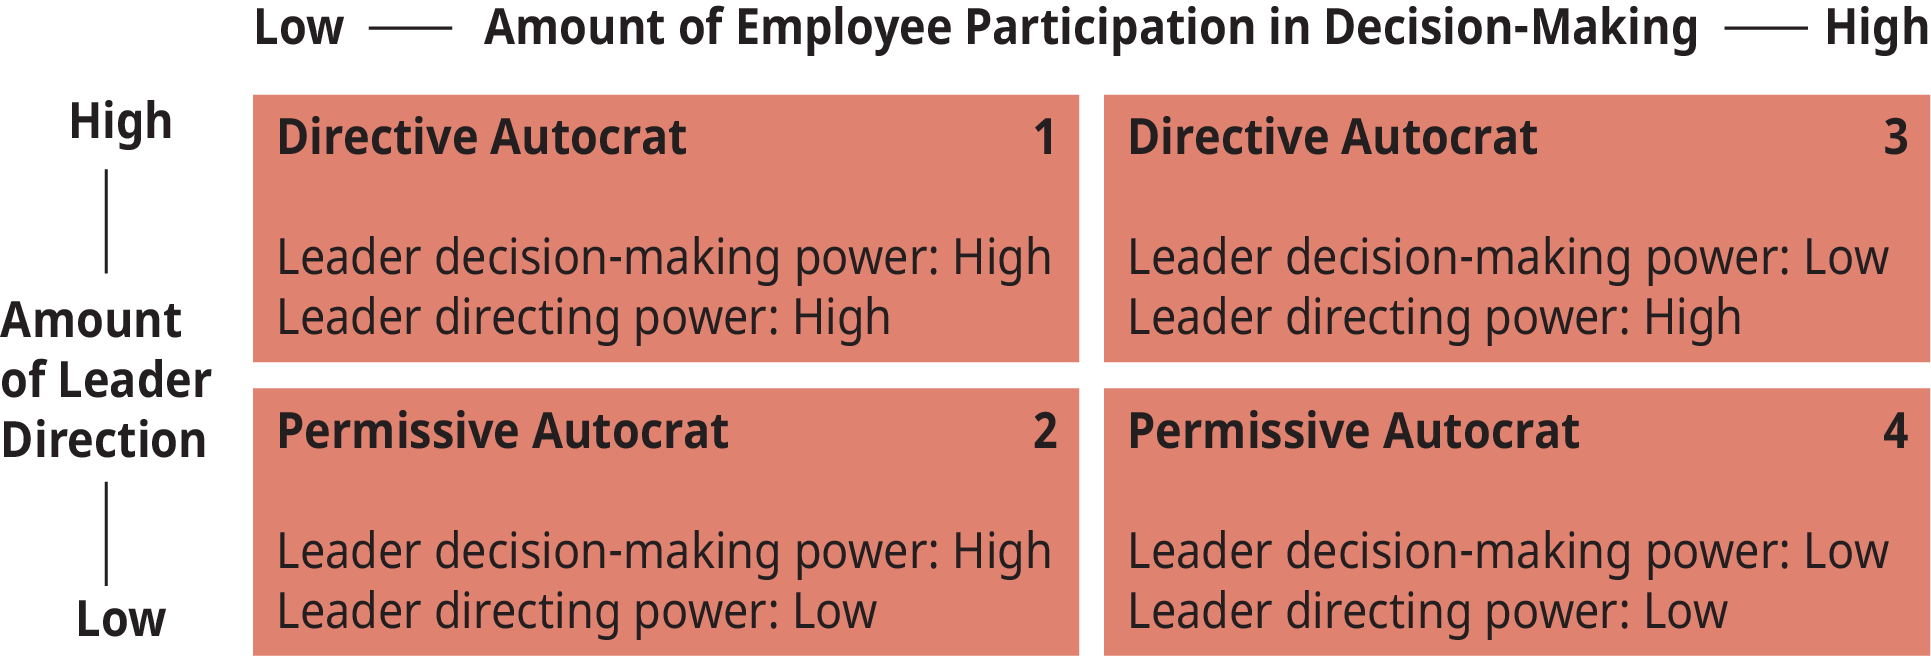 A diagram shows the matrix of the “Directive/Permissive Leadership Styles” depicting four different leadership styles.